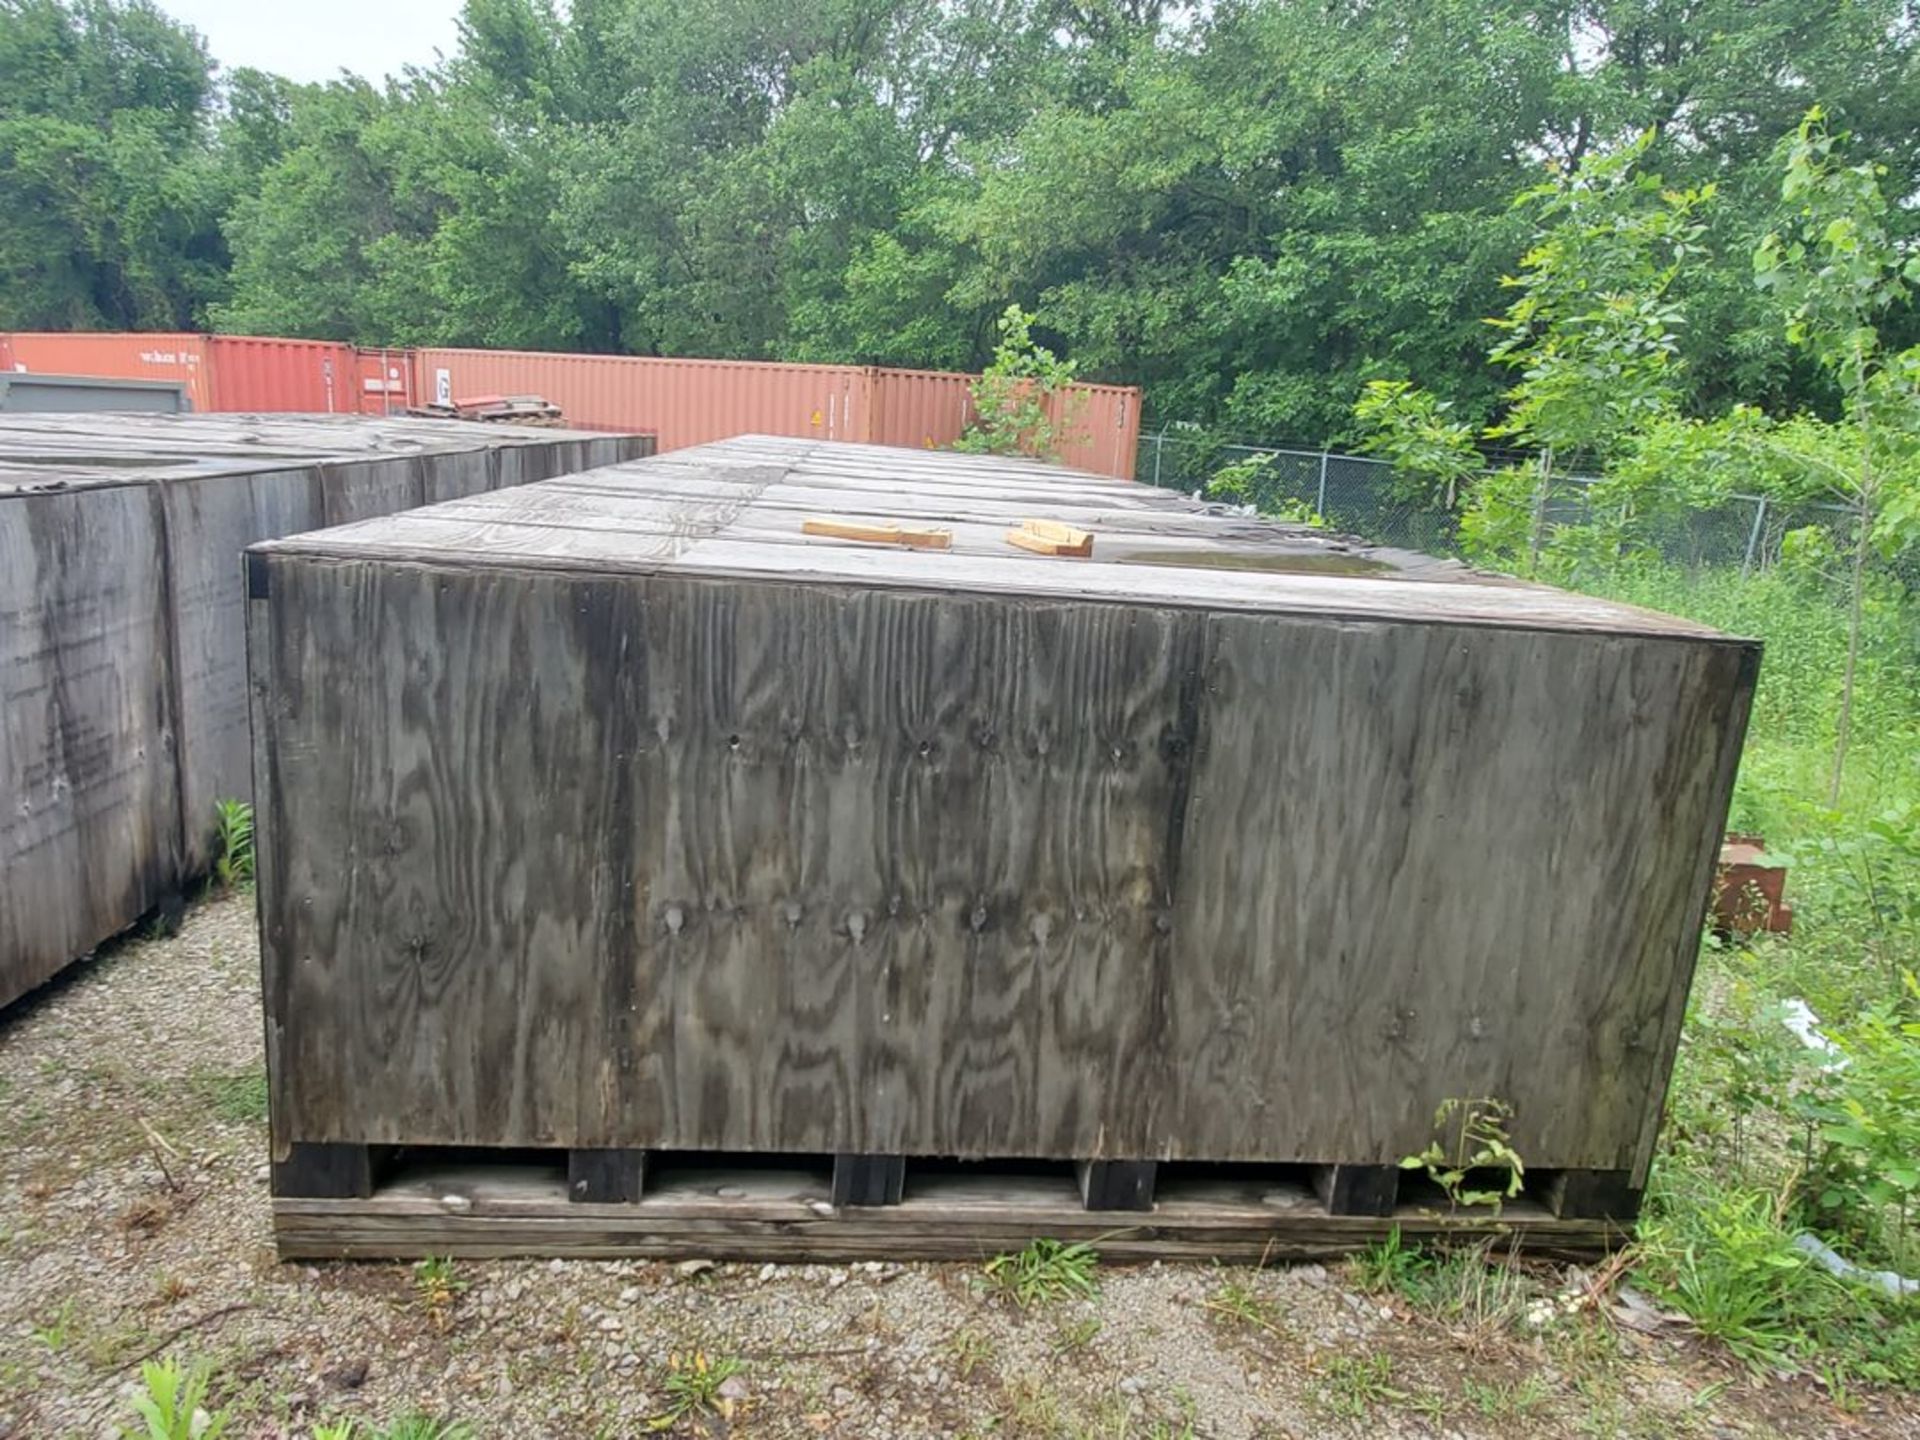 Recirculation Duct Crate Dims:464" x 126" x 64"H; Gross Weight: 10,500lbs (Location:Tulsa, OK) - Image 4 of 8